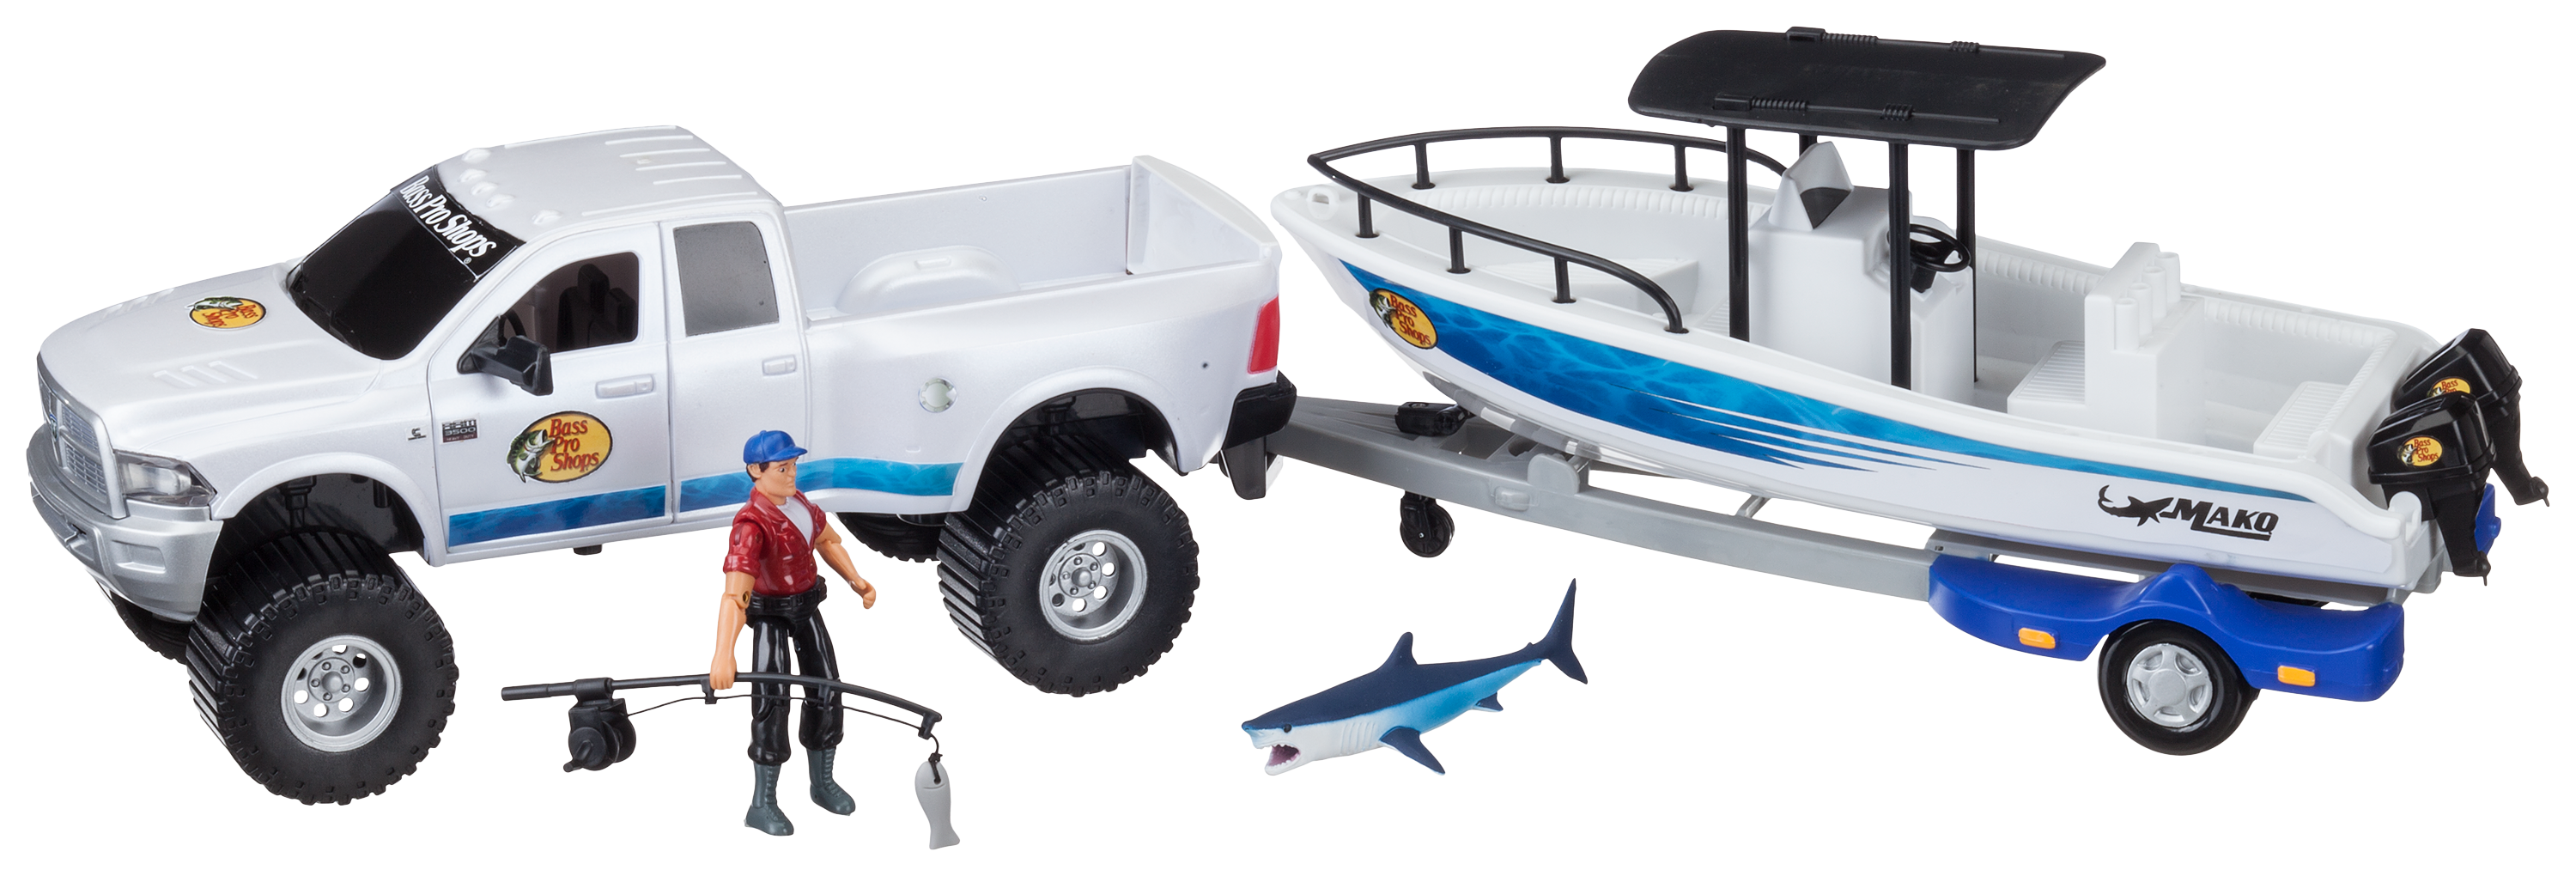 Bass Pro Shops Saltwater Fishing Adventure Truck and Boat Play Set for Kids